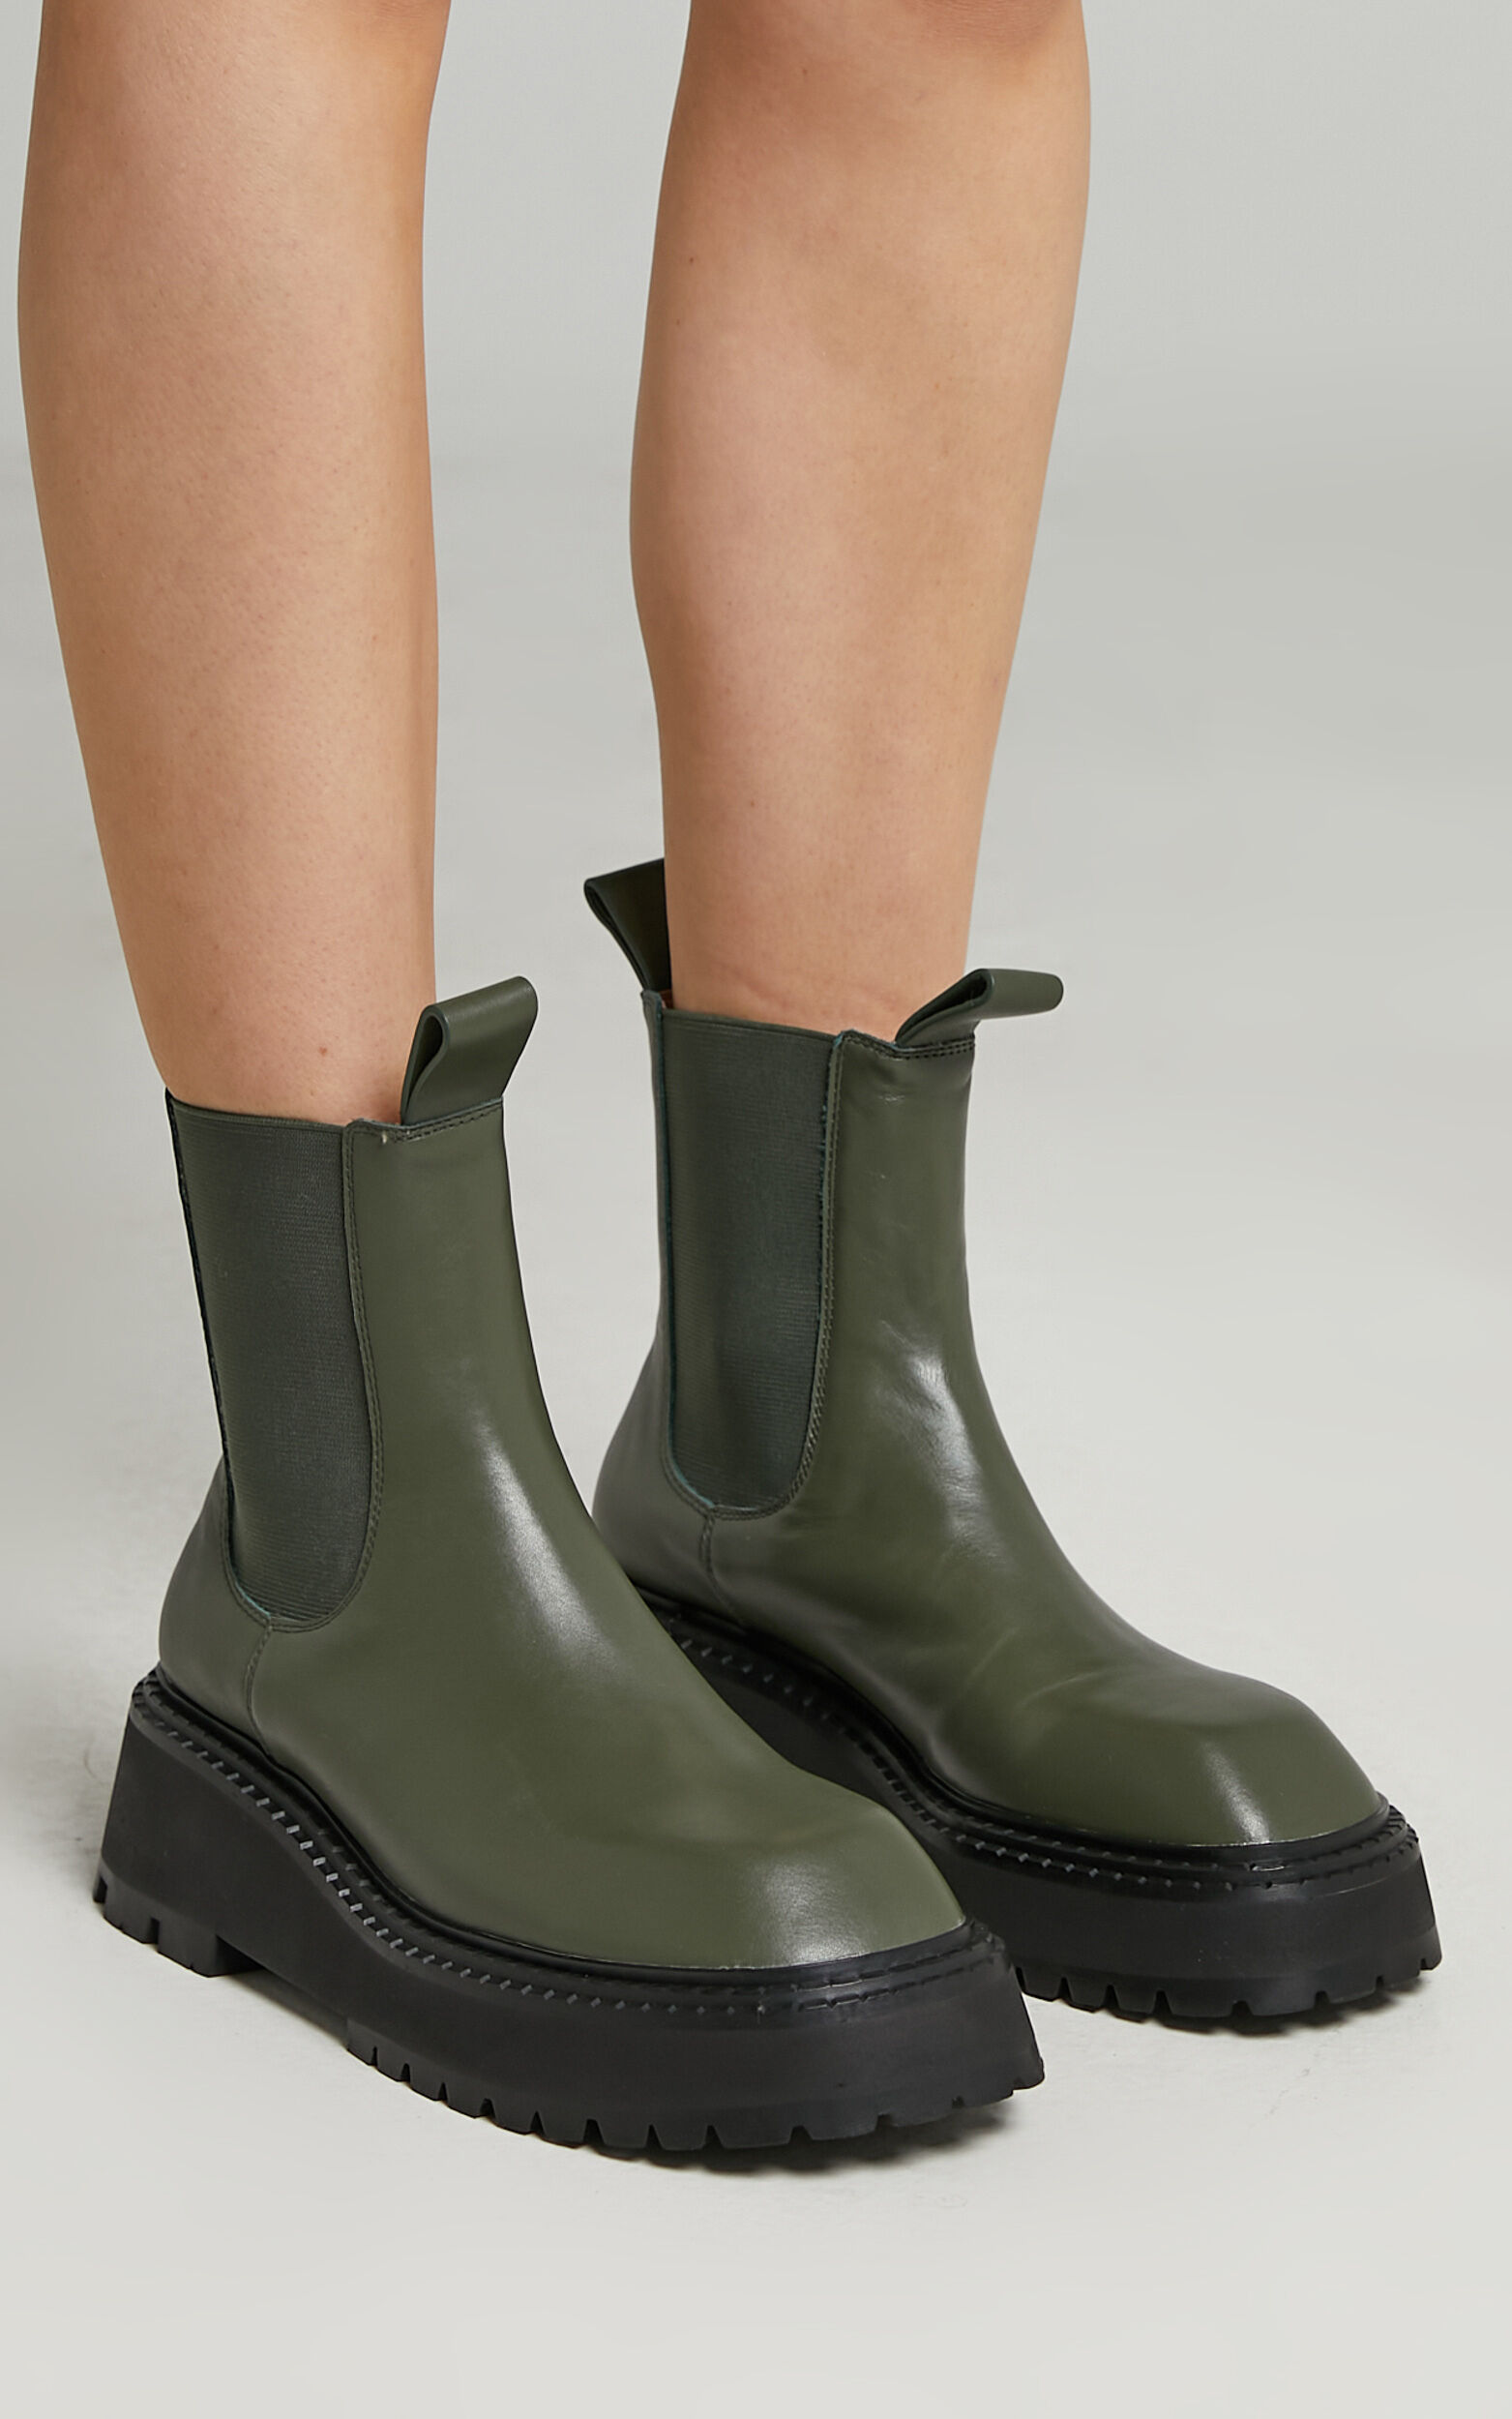 Alias Mae - Tess Boots in Olive Leather - 10, GRN1, super-hi-res image number null